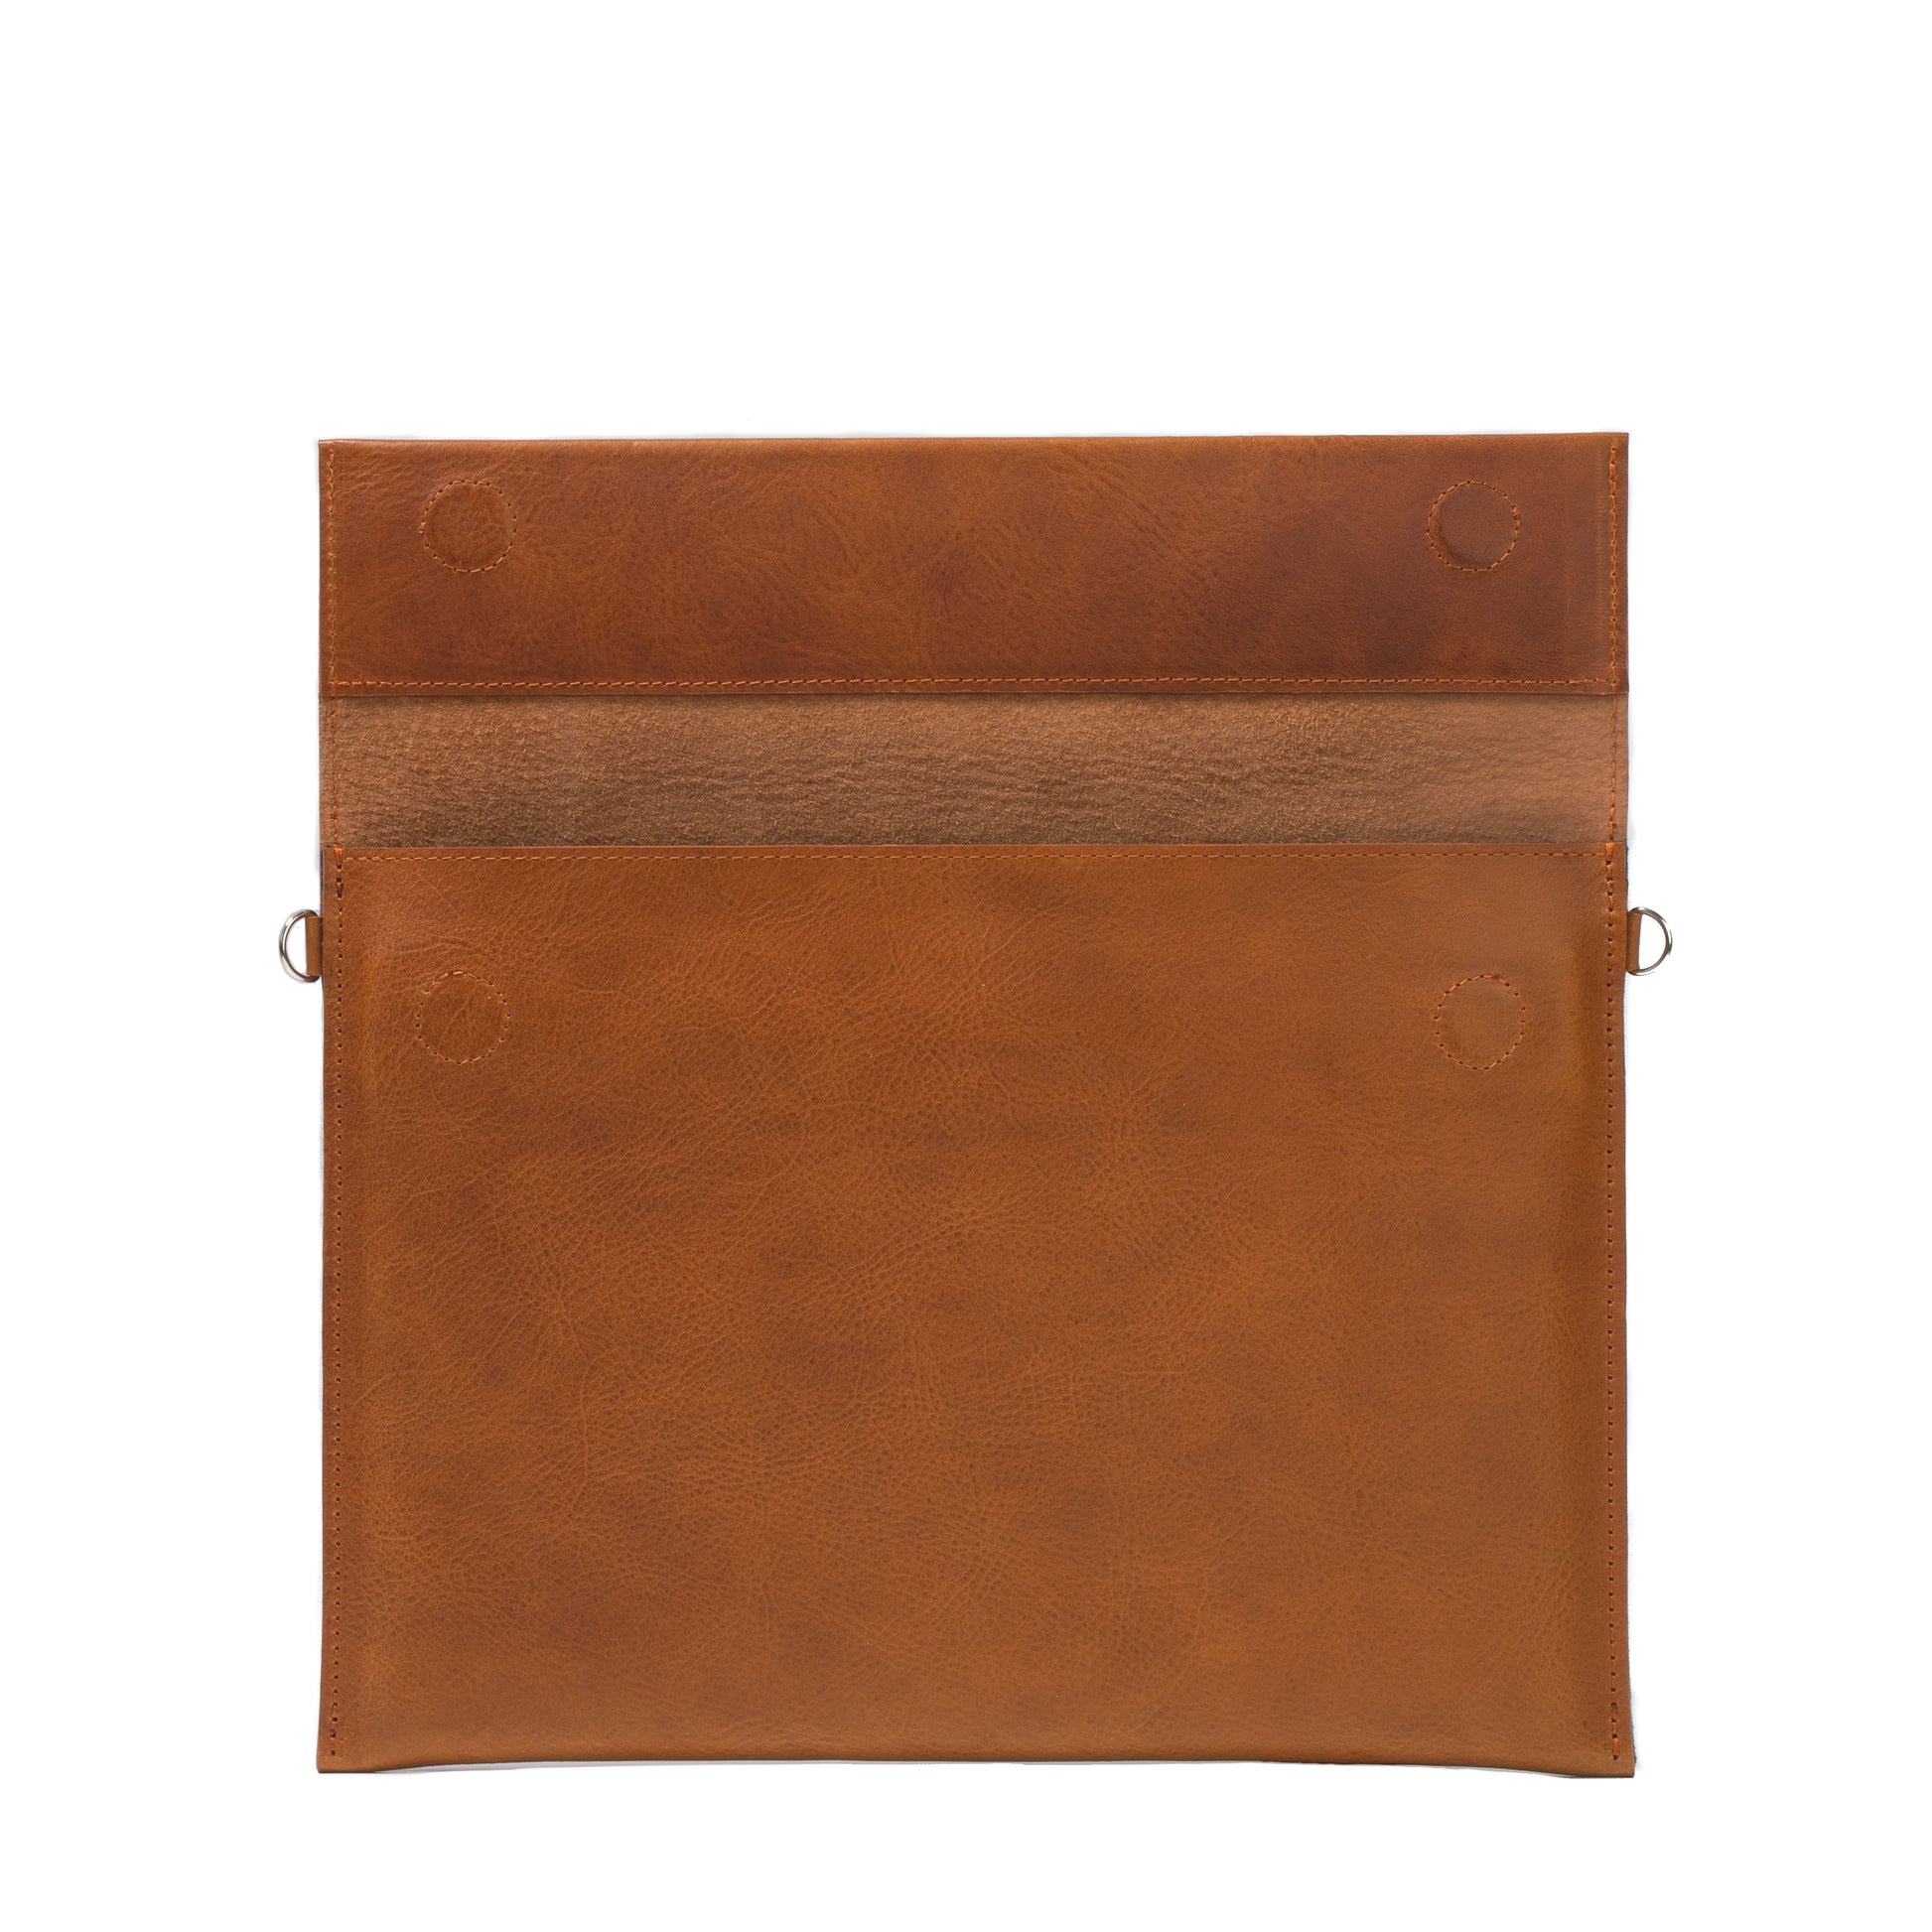 Moder mens sleeve case bag for MacBook 15 in cognac brown tan color with adjustable strap made from premium Italian leather